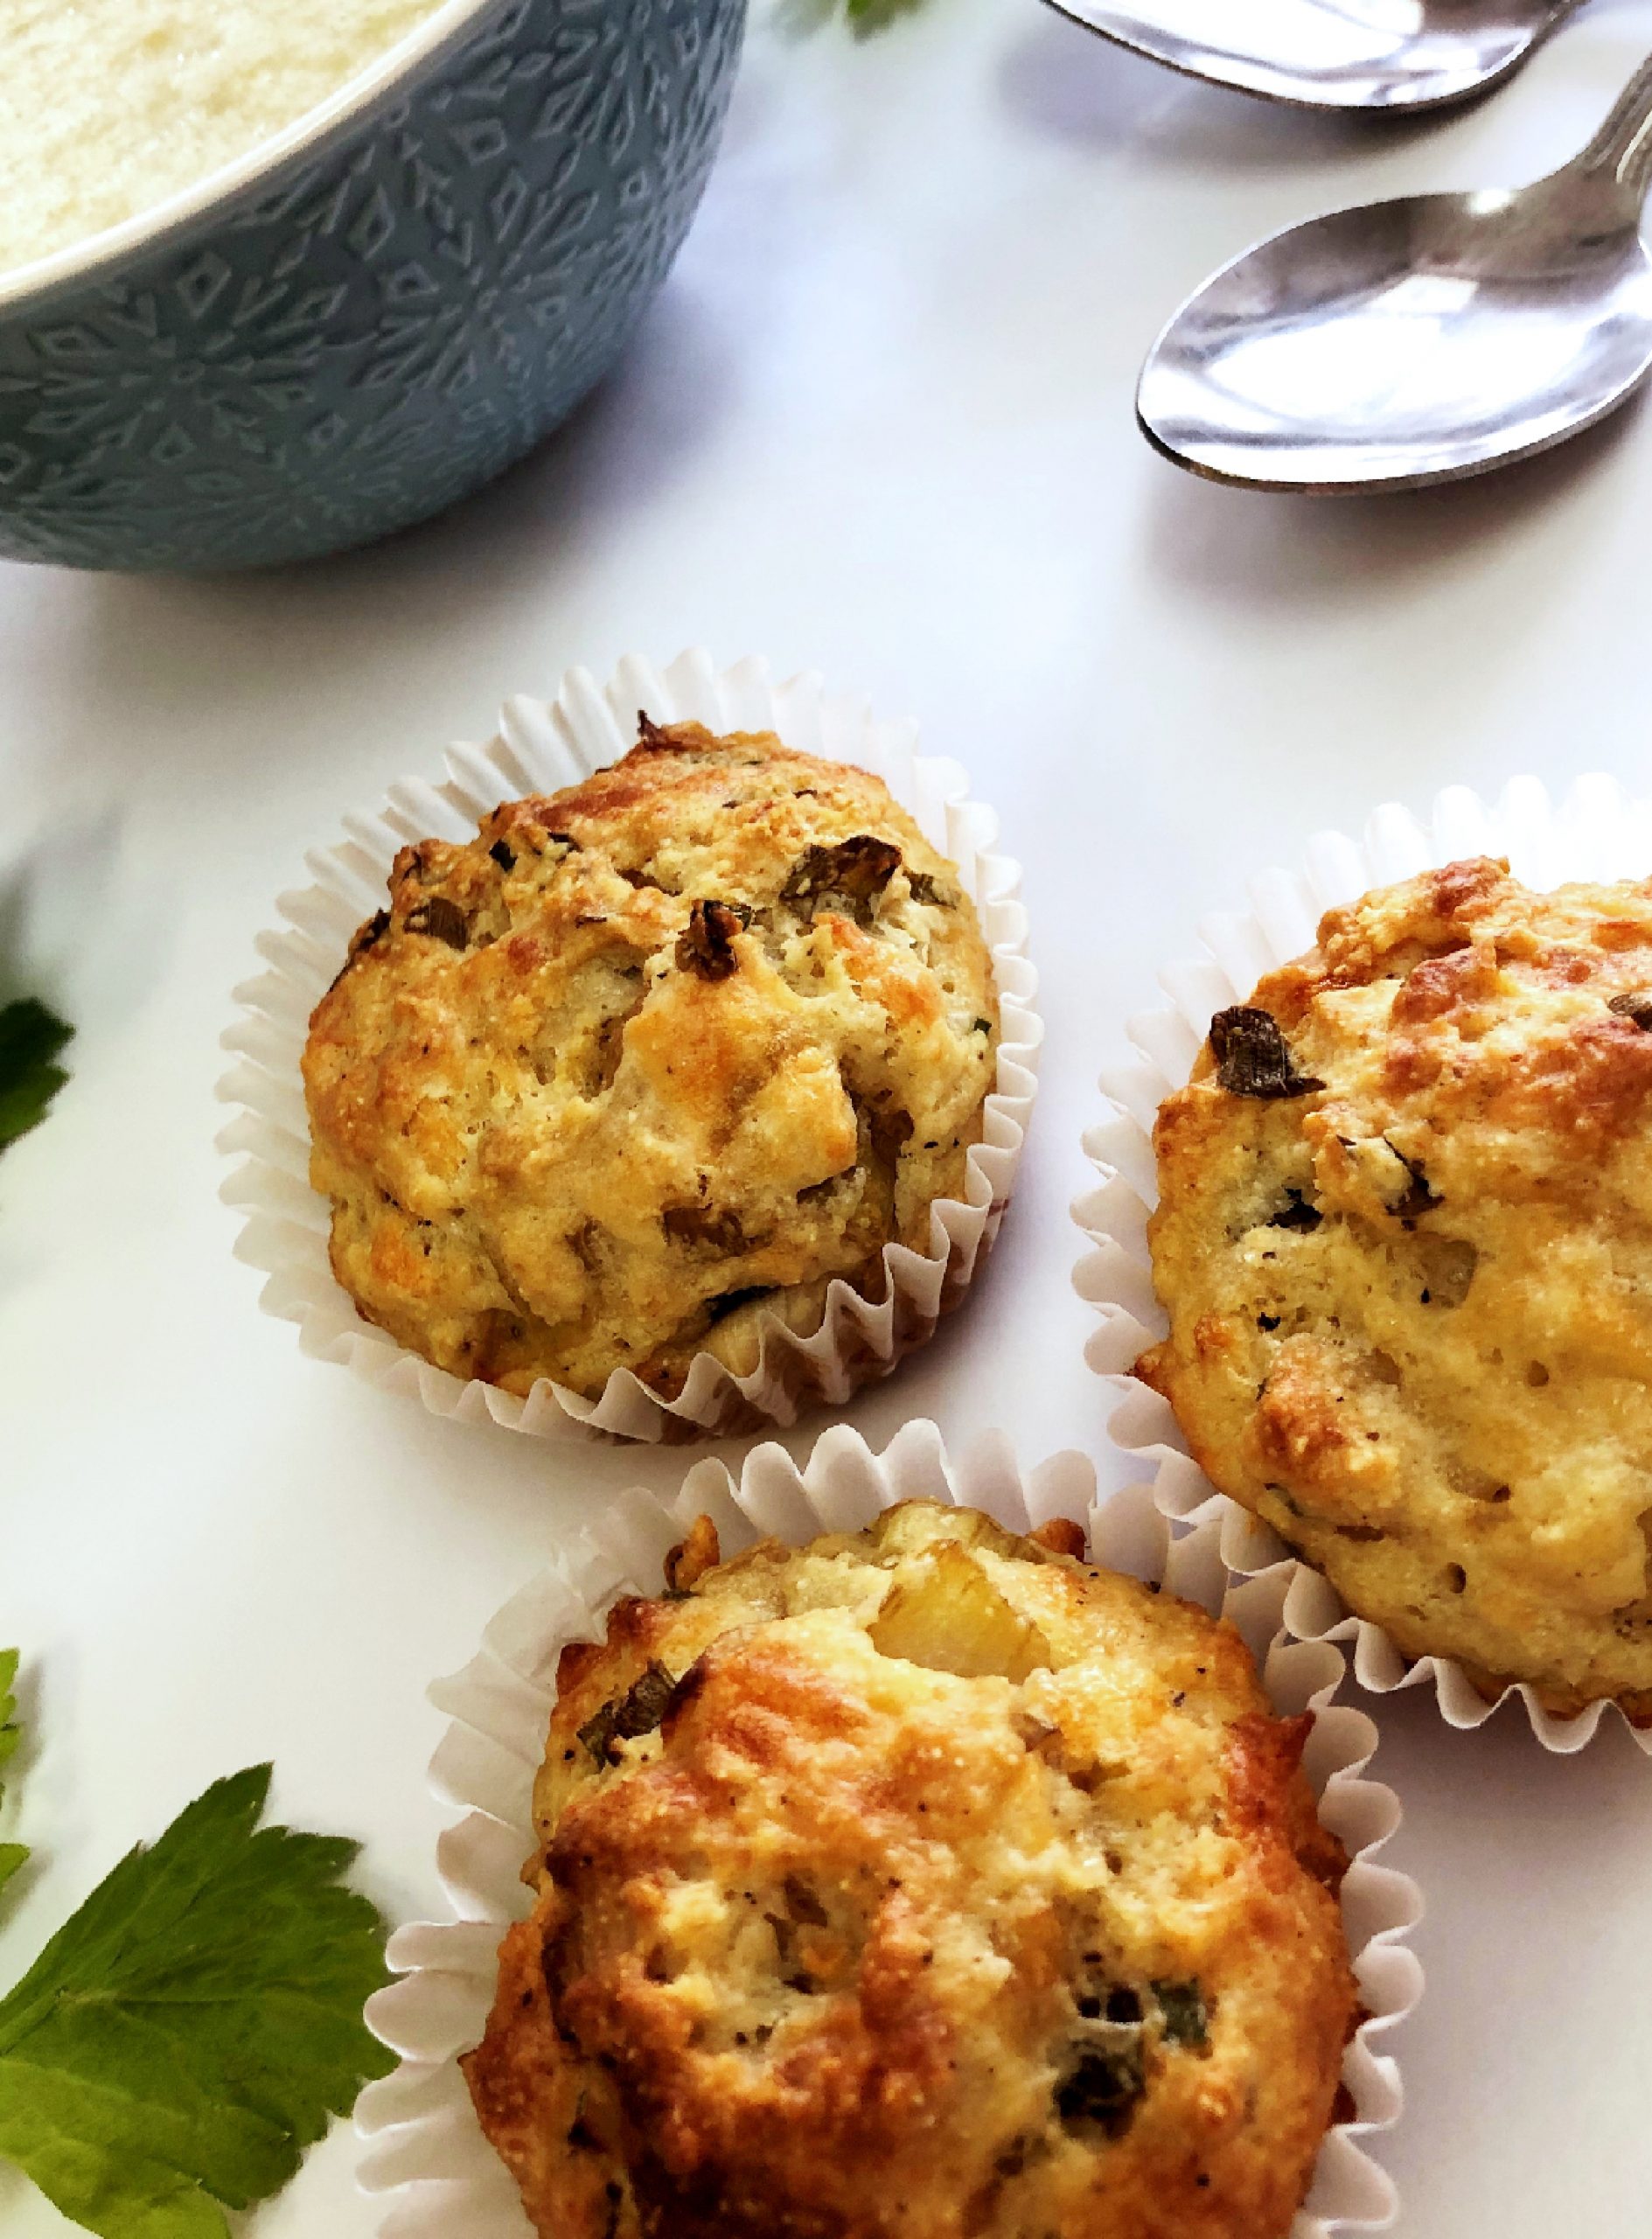 Muffins au fromage et oignons